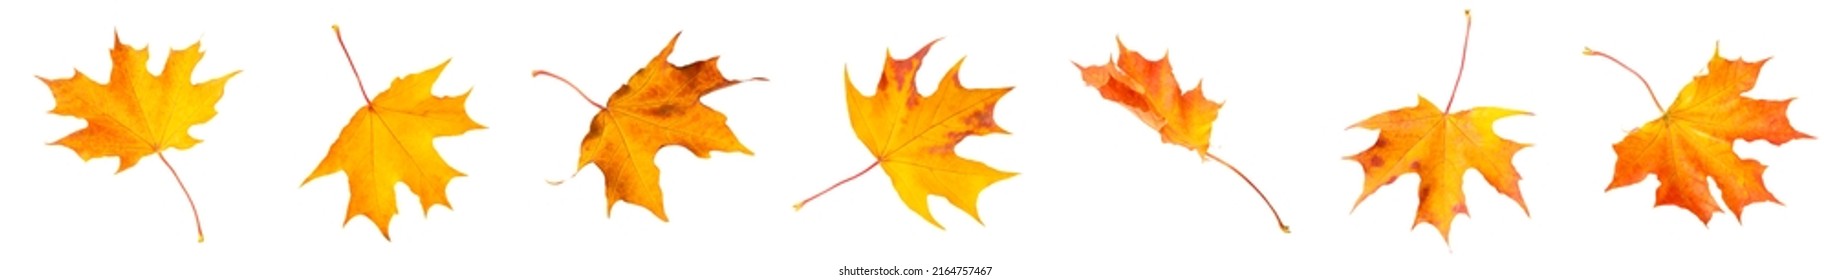 Collection of red fallen autumn leaves isolated on white background. - Shutterstock ID 2164757467